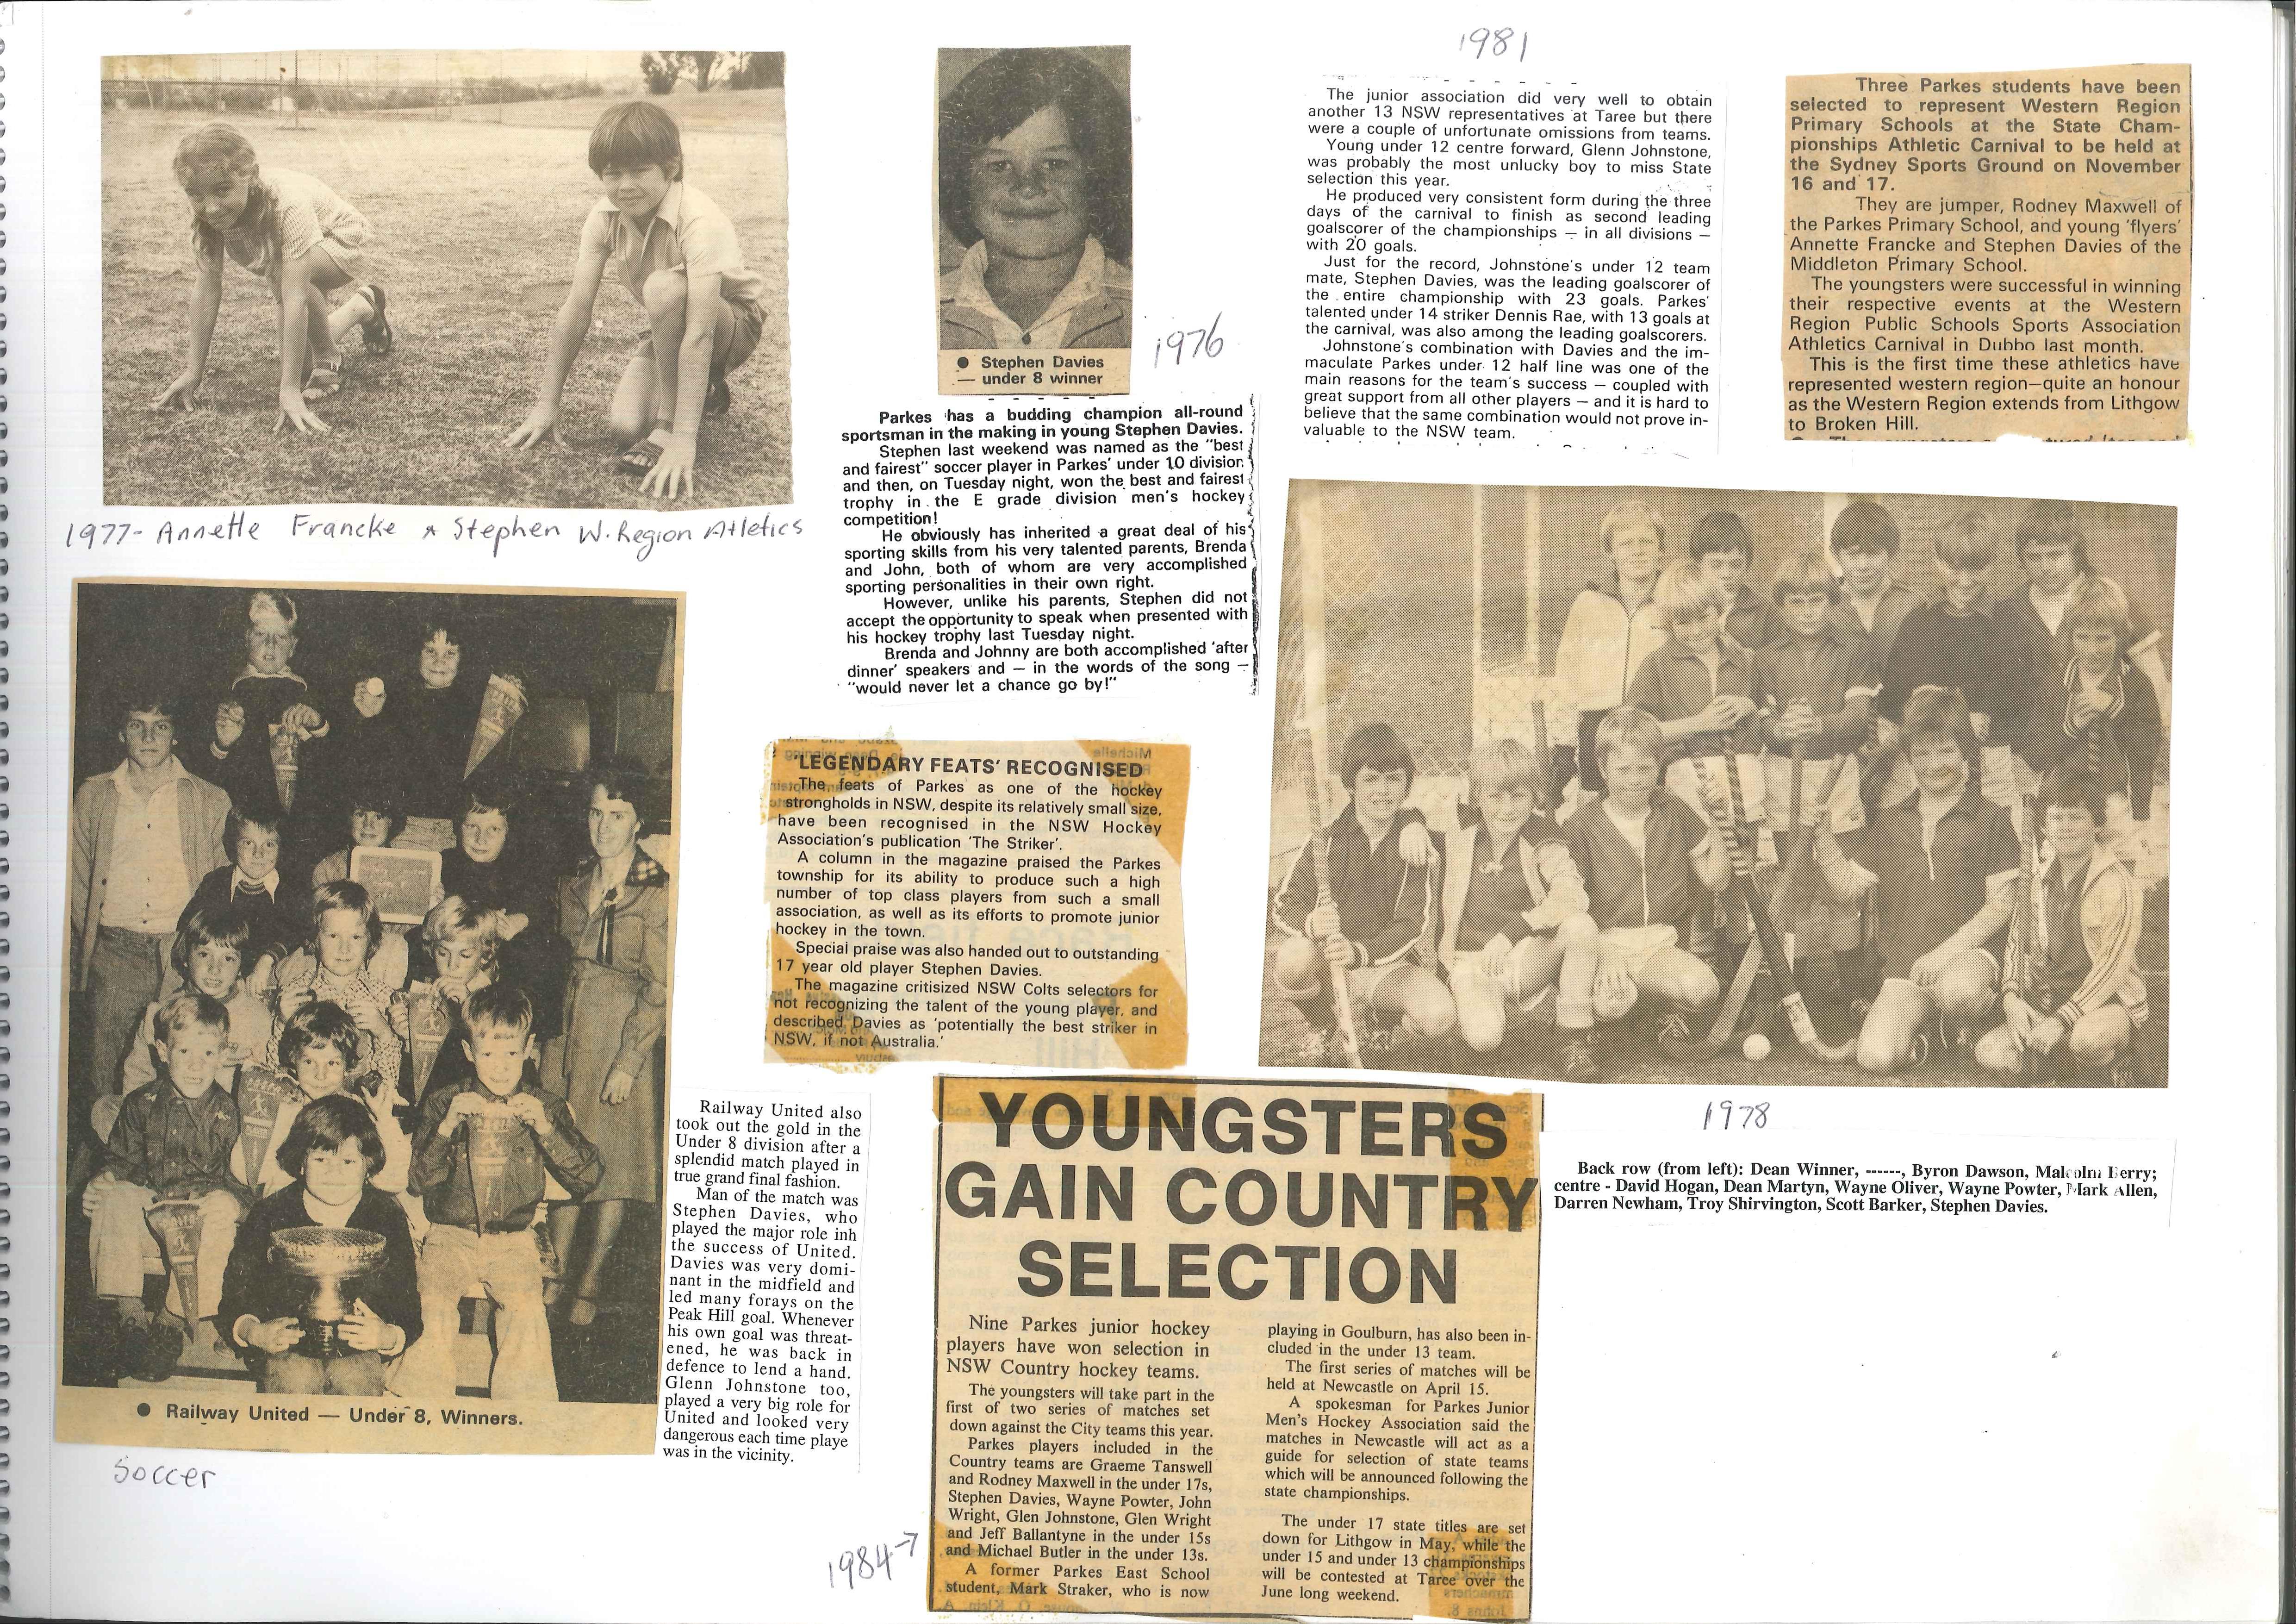 The scrapbook of sporting prowess! Newspaper clippings collected and collated by Stephen's parents that highlight his passion and skill in a range of sports including hockey, soccer and athletics. Another highlight is the fact that during Stephen's time in Parkes, the local association produced a lot of talented players. Photographs courtesy of John and Brenda Davies